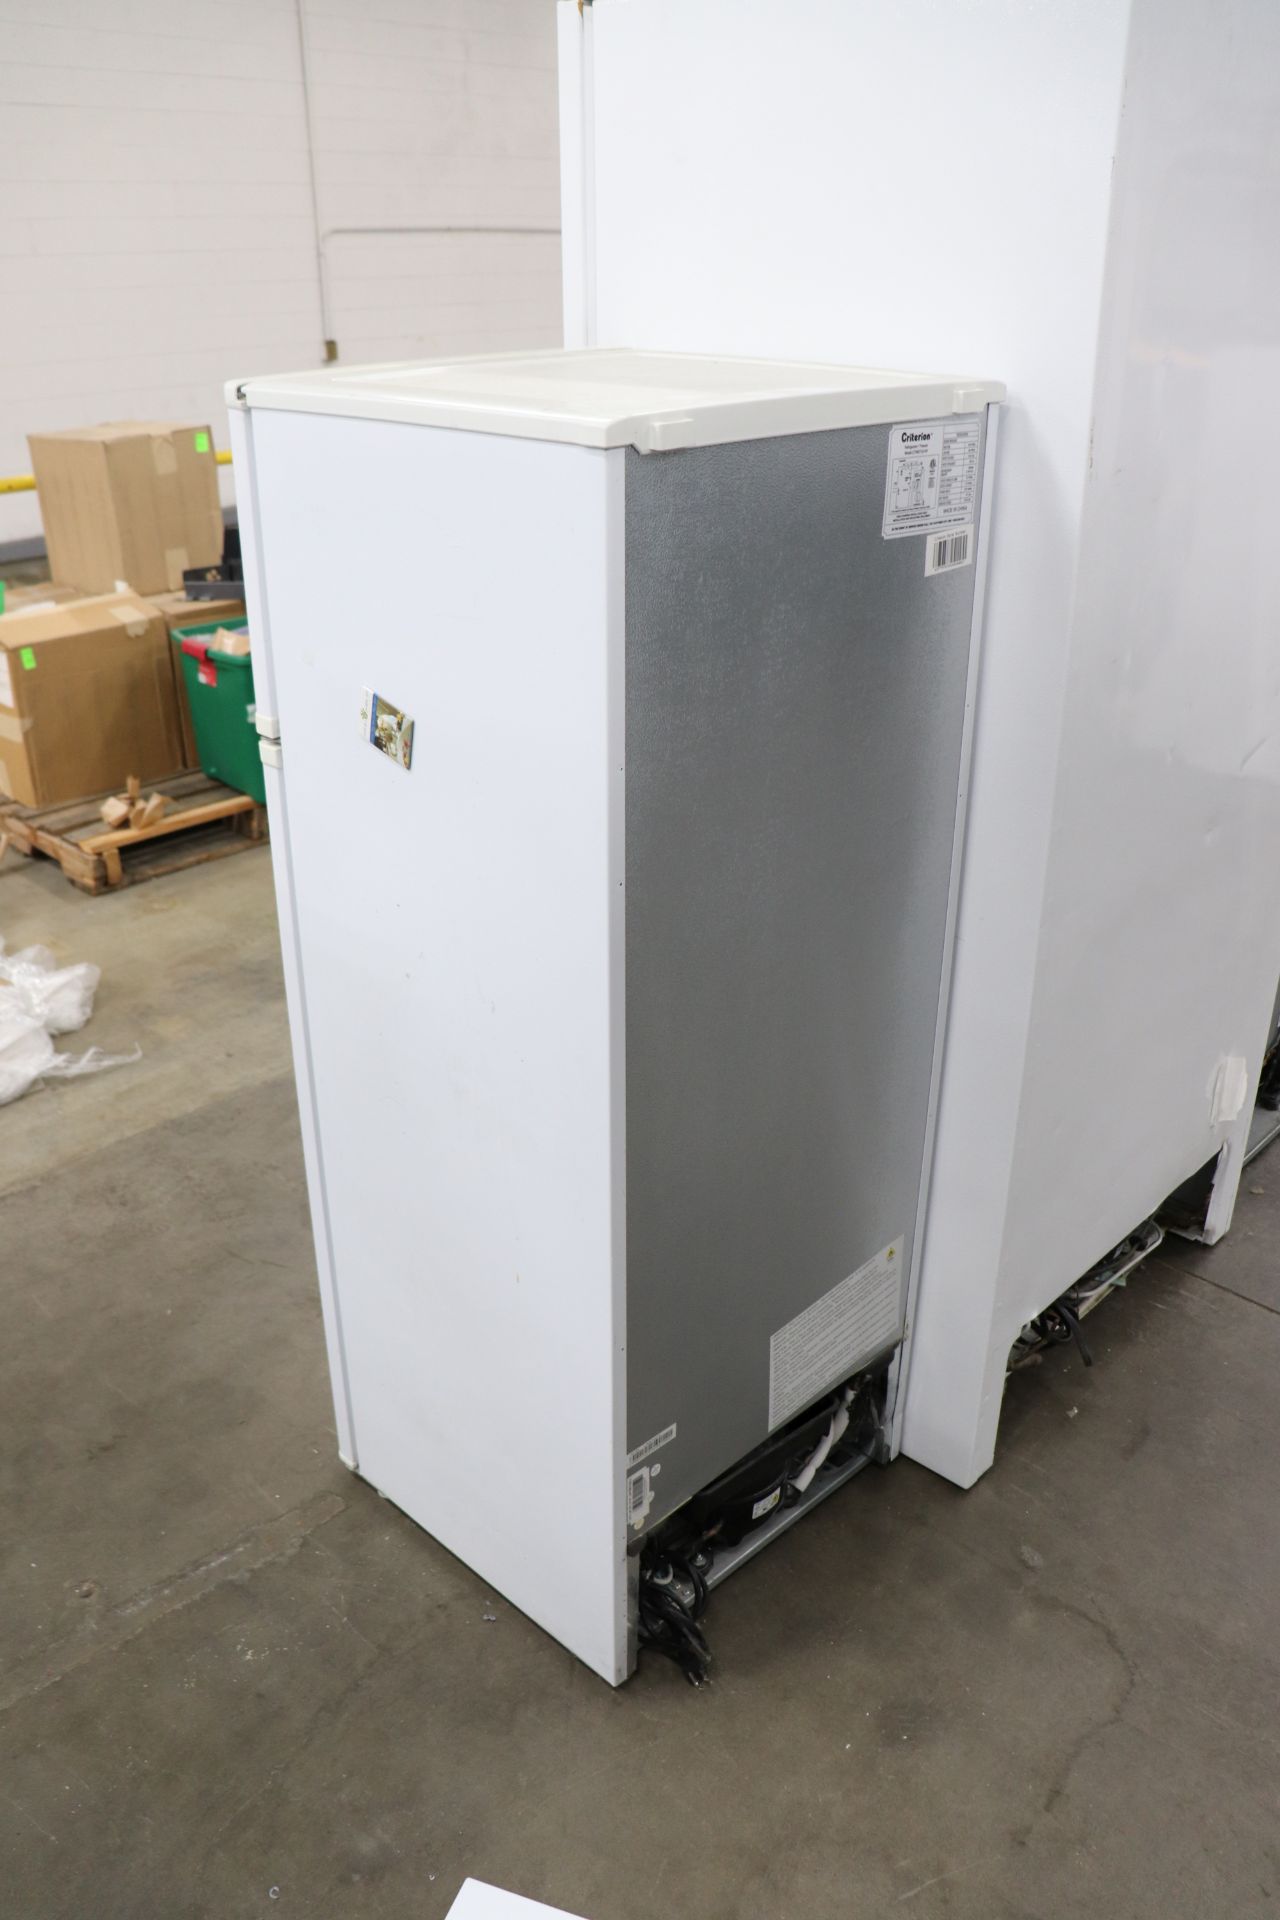 Criterion Combination Freezer/Refrigerator, Model CTMR73A1W, Serial A57779707351581000027 - Image 4 of 7